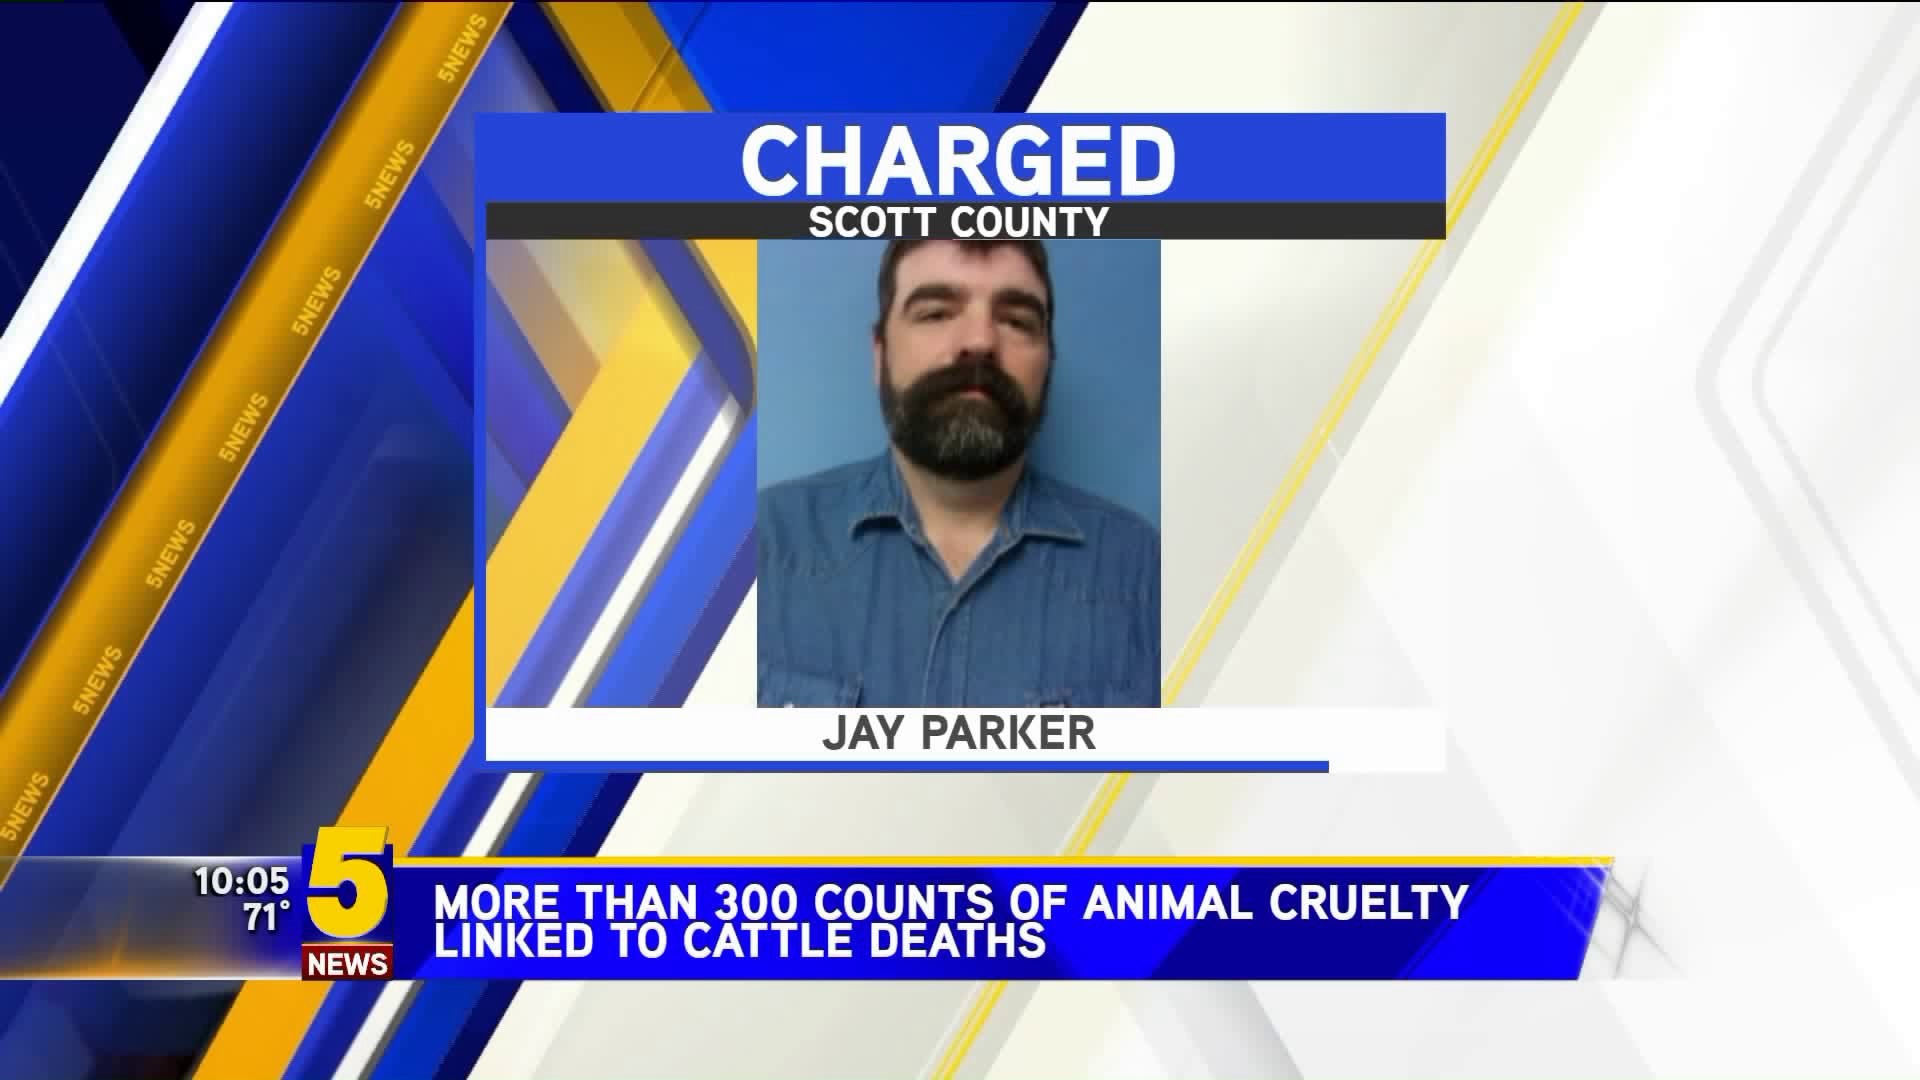 More Than 300 Counts of Animal Cruelty